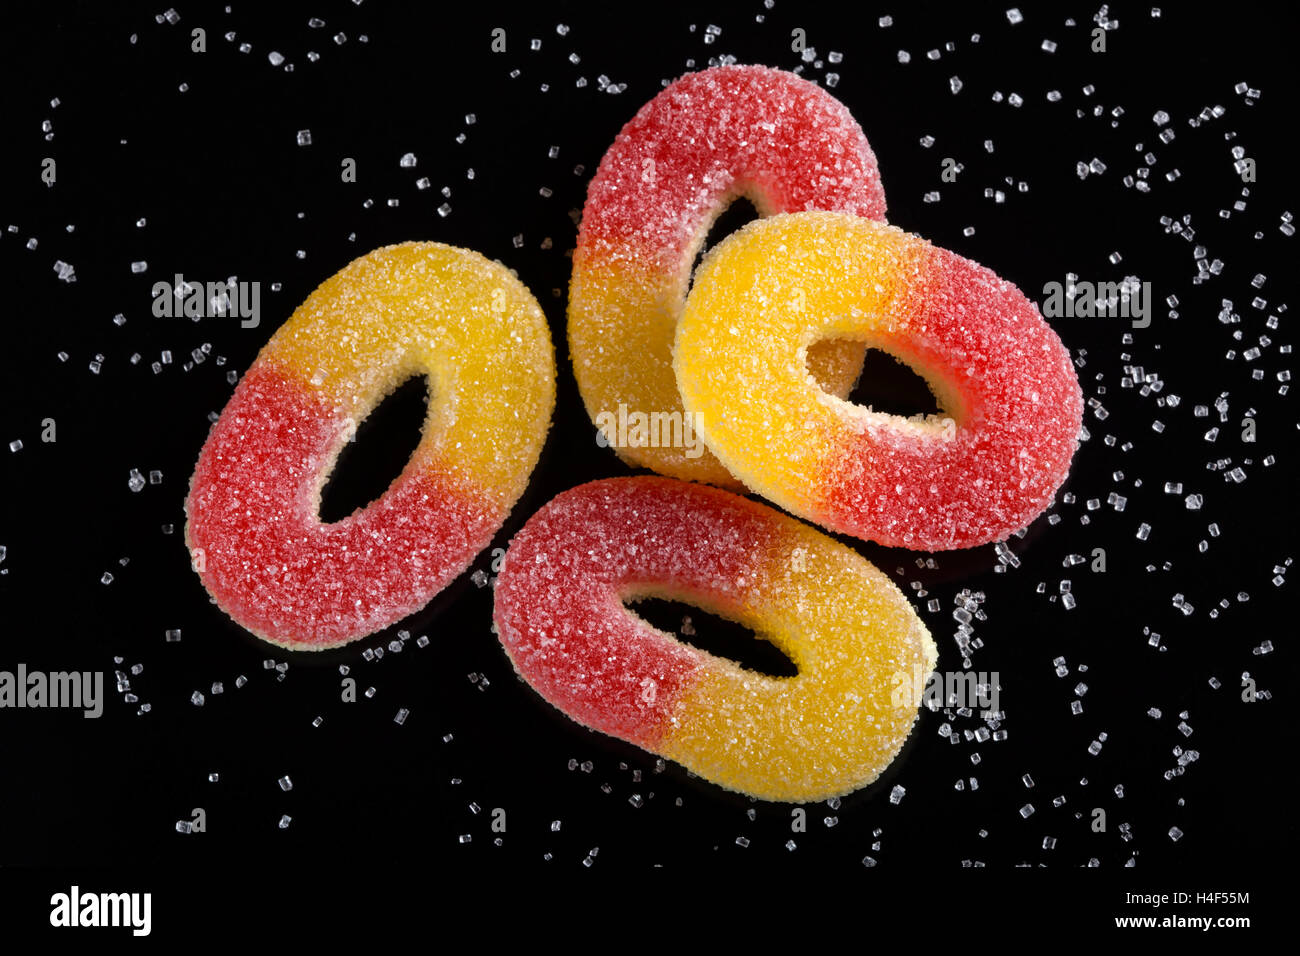 Jelly candies with white sugar over black background Stock Photo